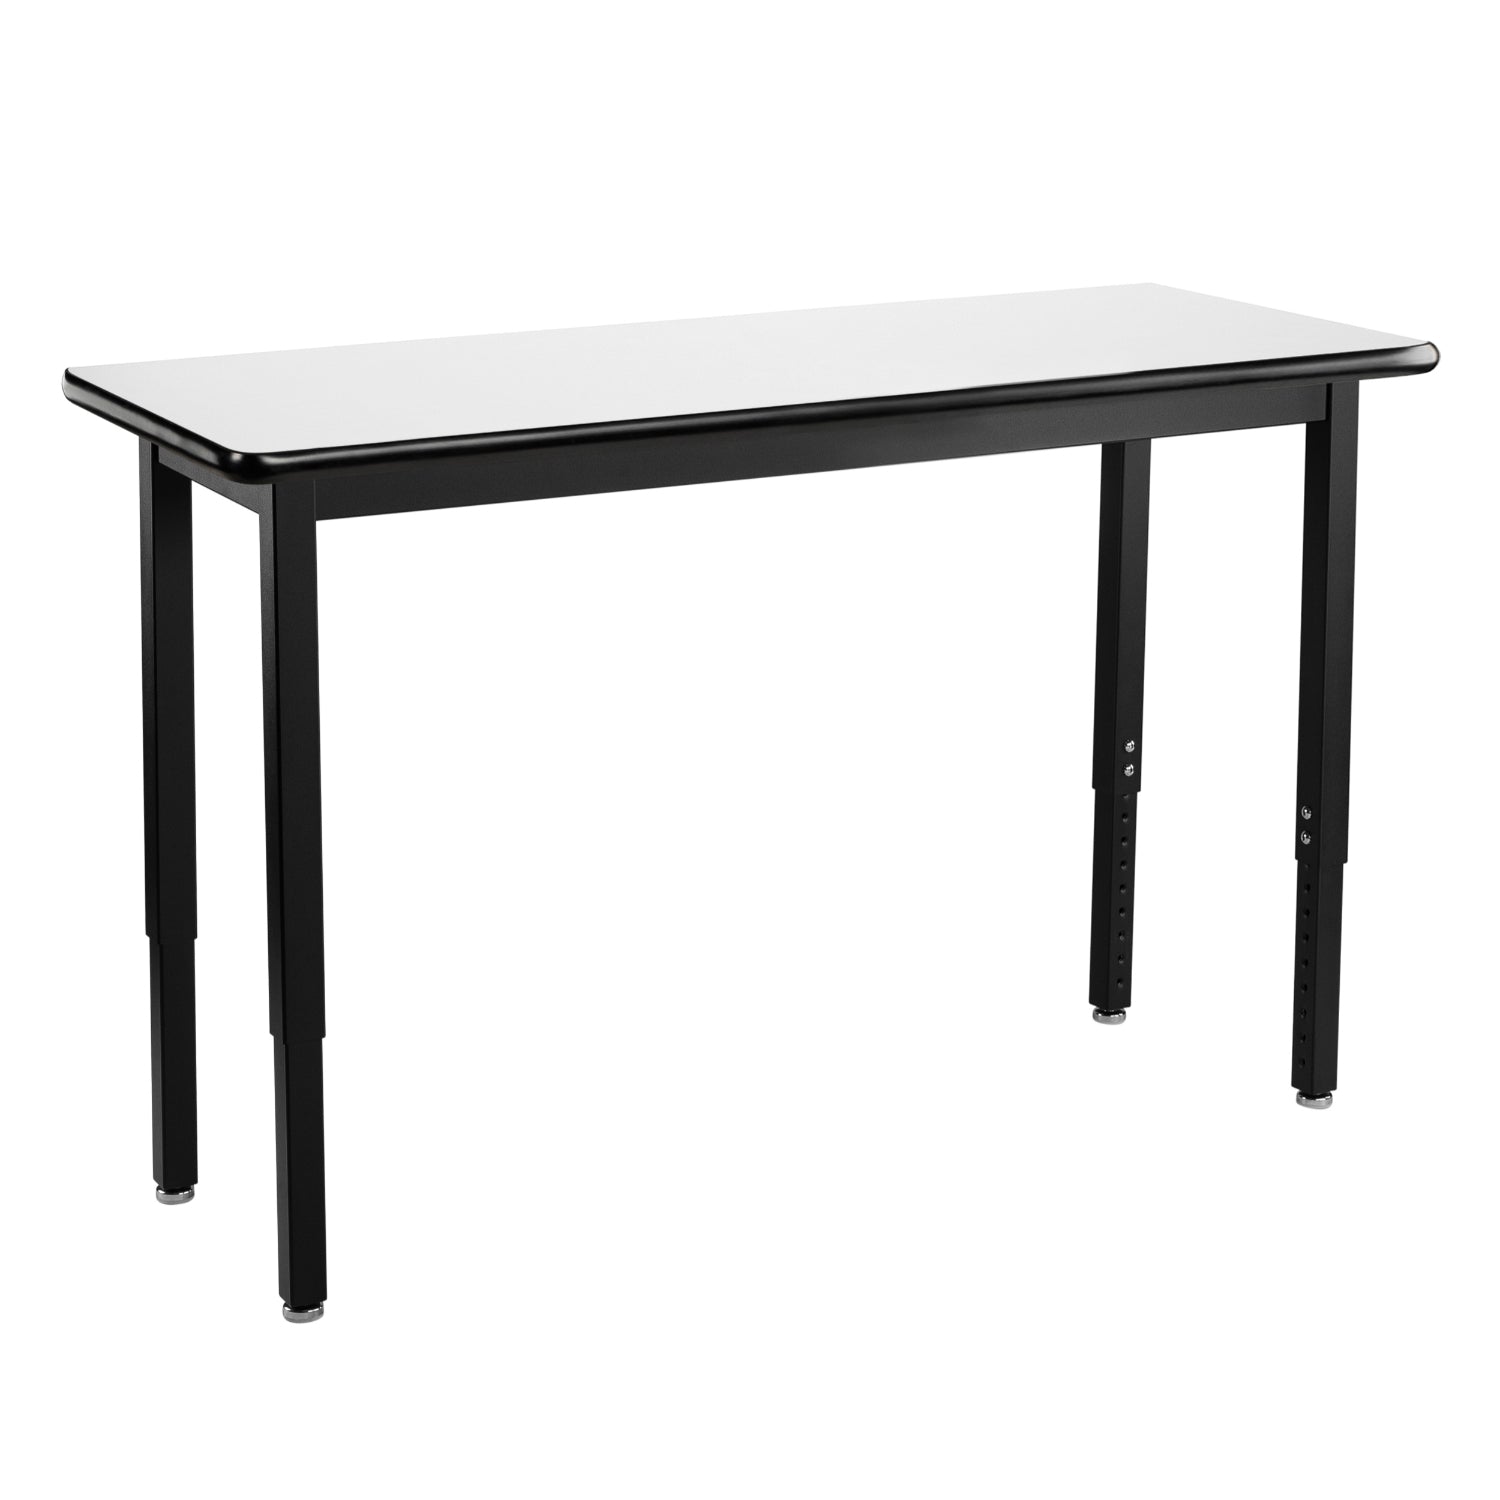 Heavy-Duty Height-Adjustable Utility Table, Black Frame, 18" x 54", Whiteboard High-Pressure Laminate Top